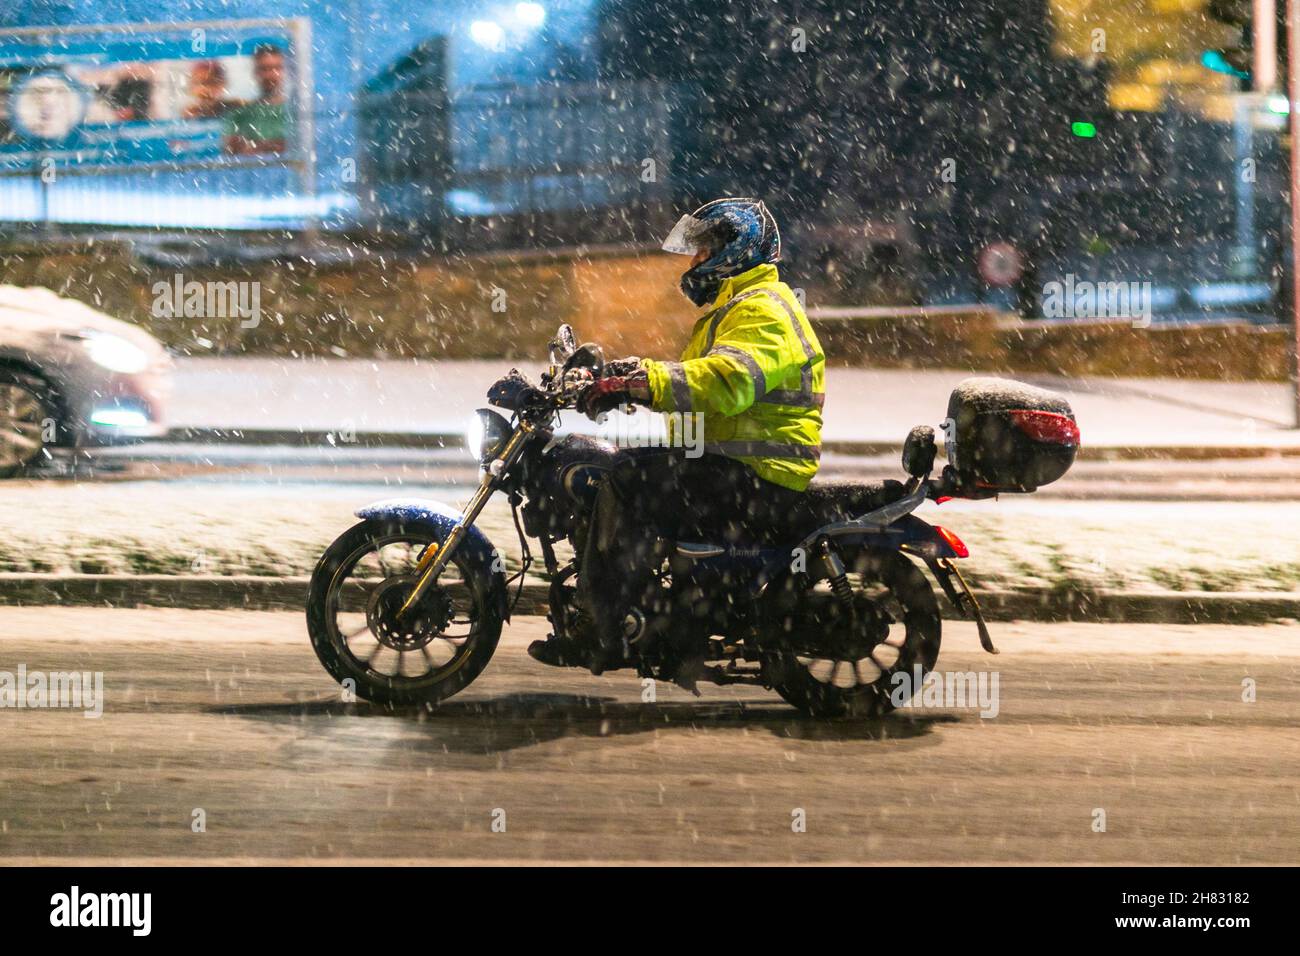 Cradley Heath, West Midlands, UK. 27th Nov, 2021. A motorcyclist negotiates a steep hill as a blanket of snow hits the the roads in Cradley Heath, West Midlands, as Saturday morning traffic is thanksfully light. Road conditions are dangerous. Credit: Peter Lopeman/Alamy Live News Stock Photo